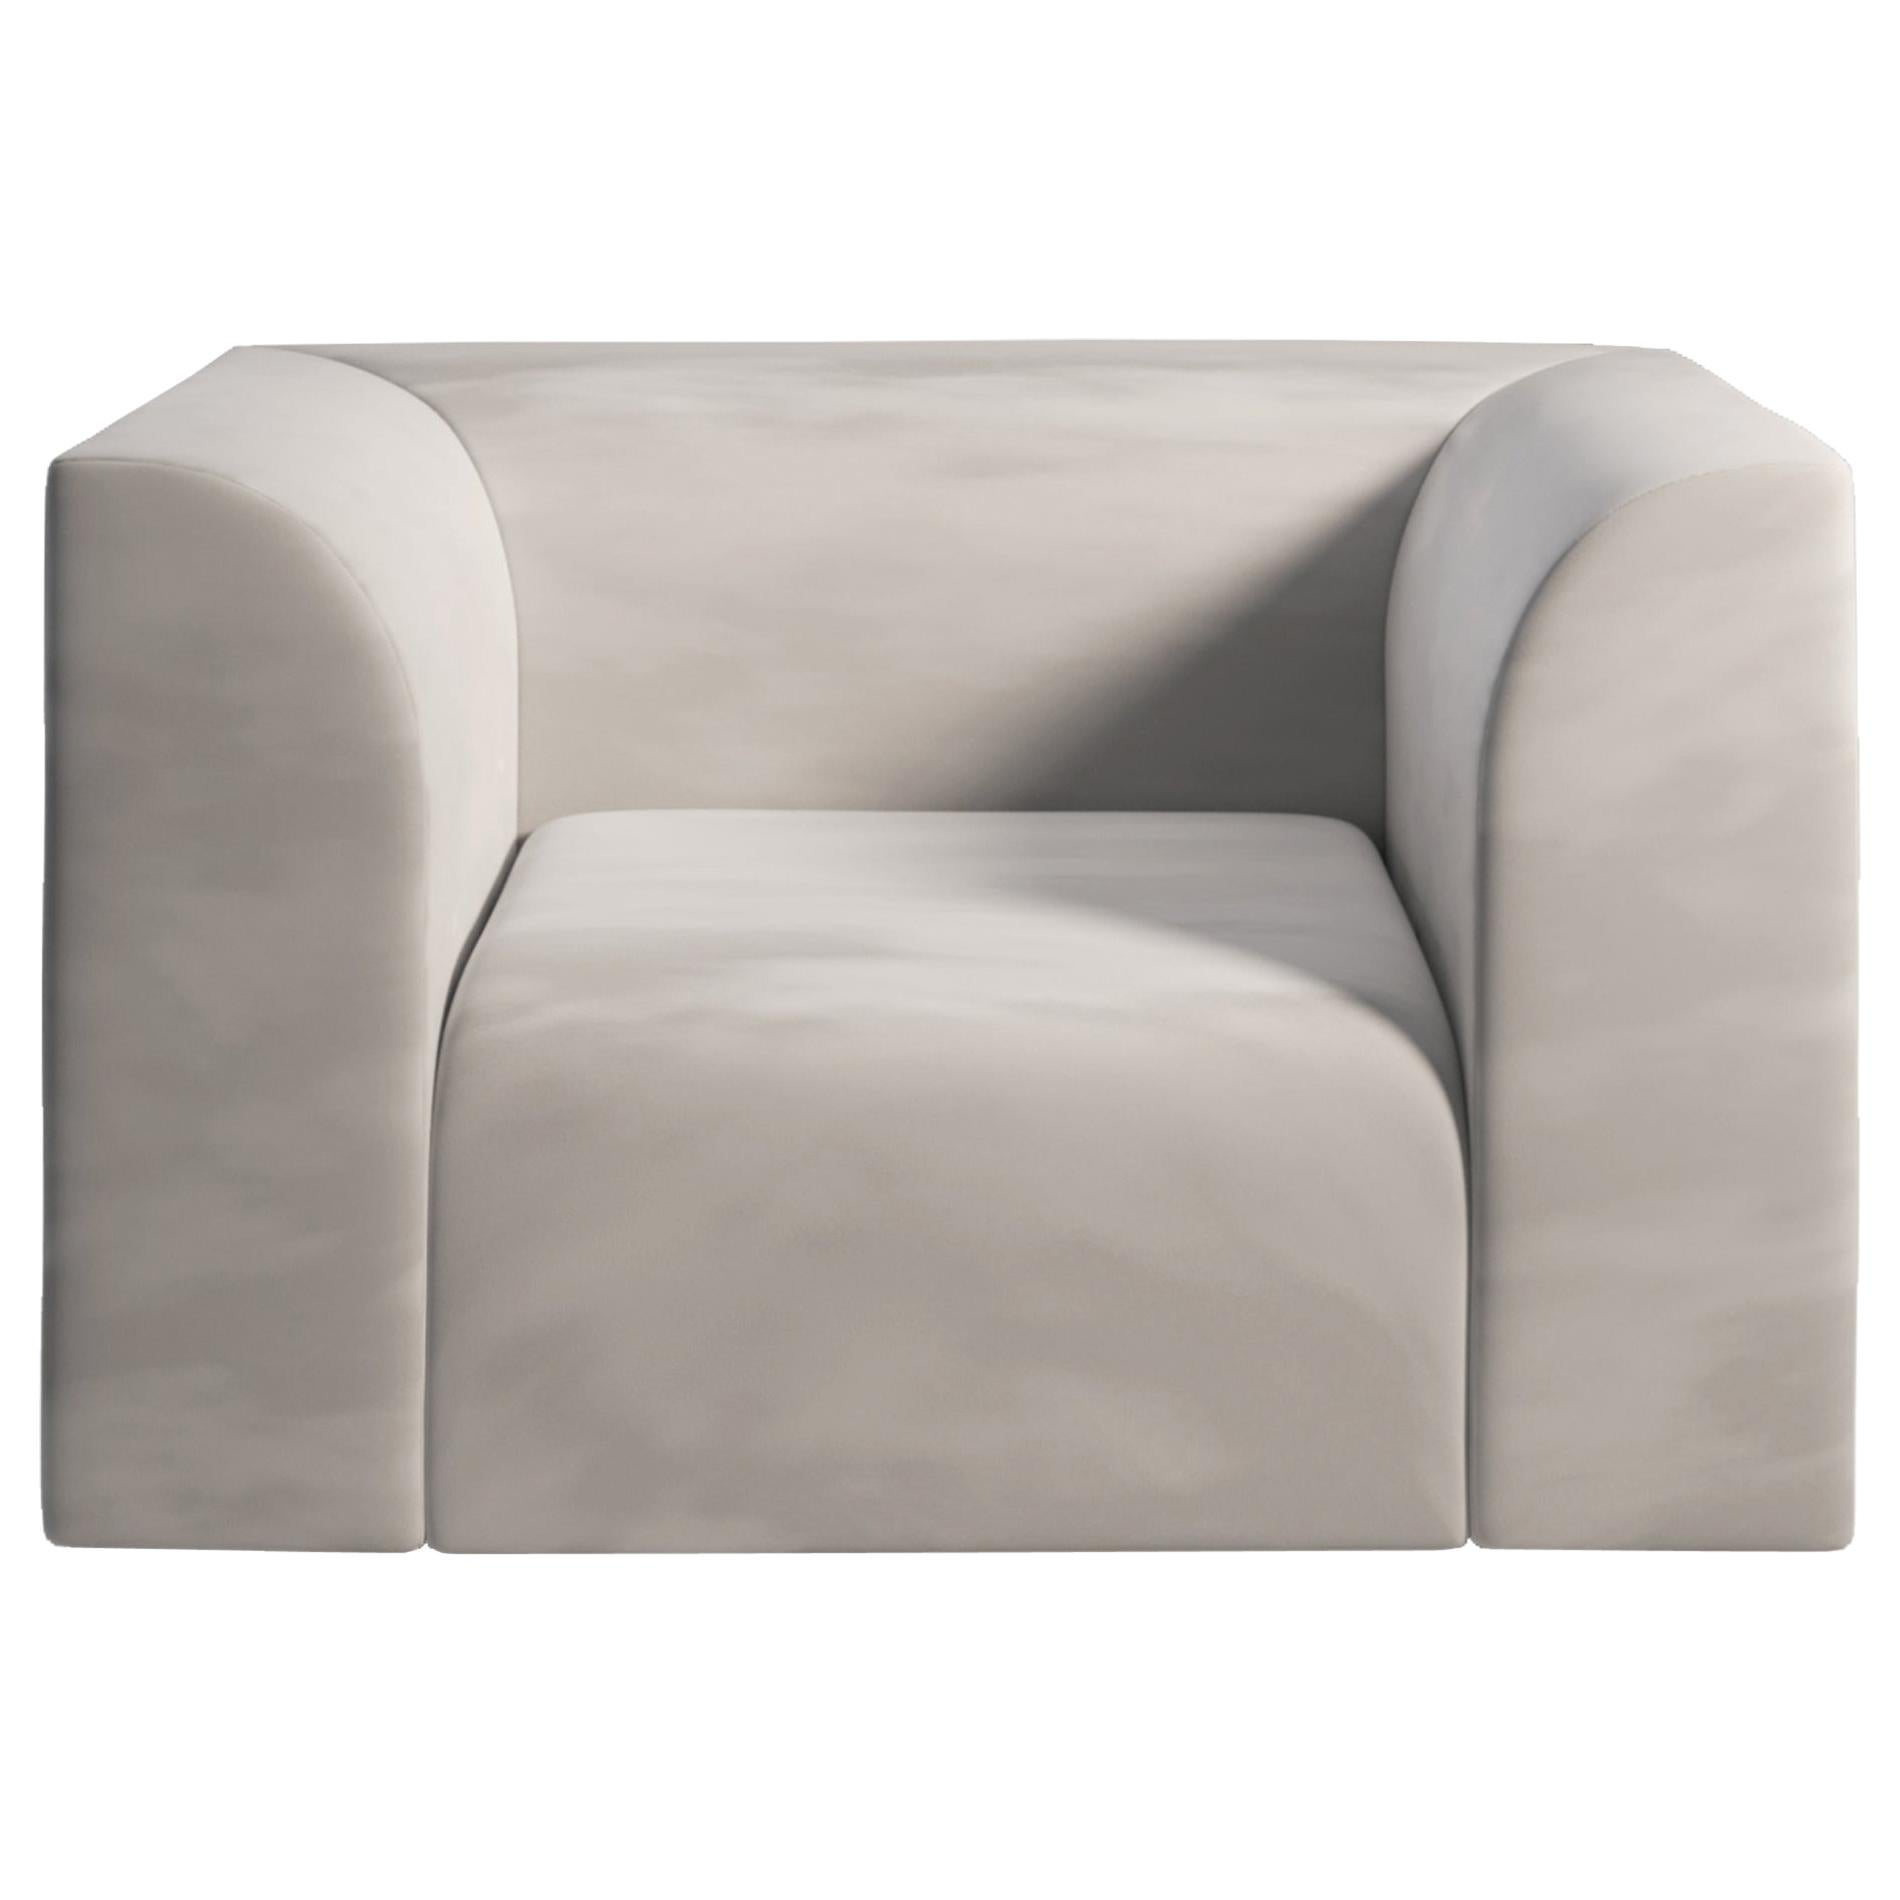 ARCHI 1 Seat Contemporary armchair in Fabric